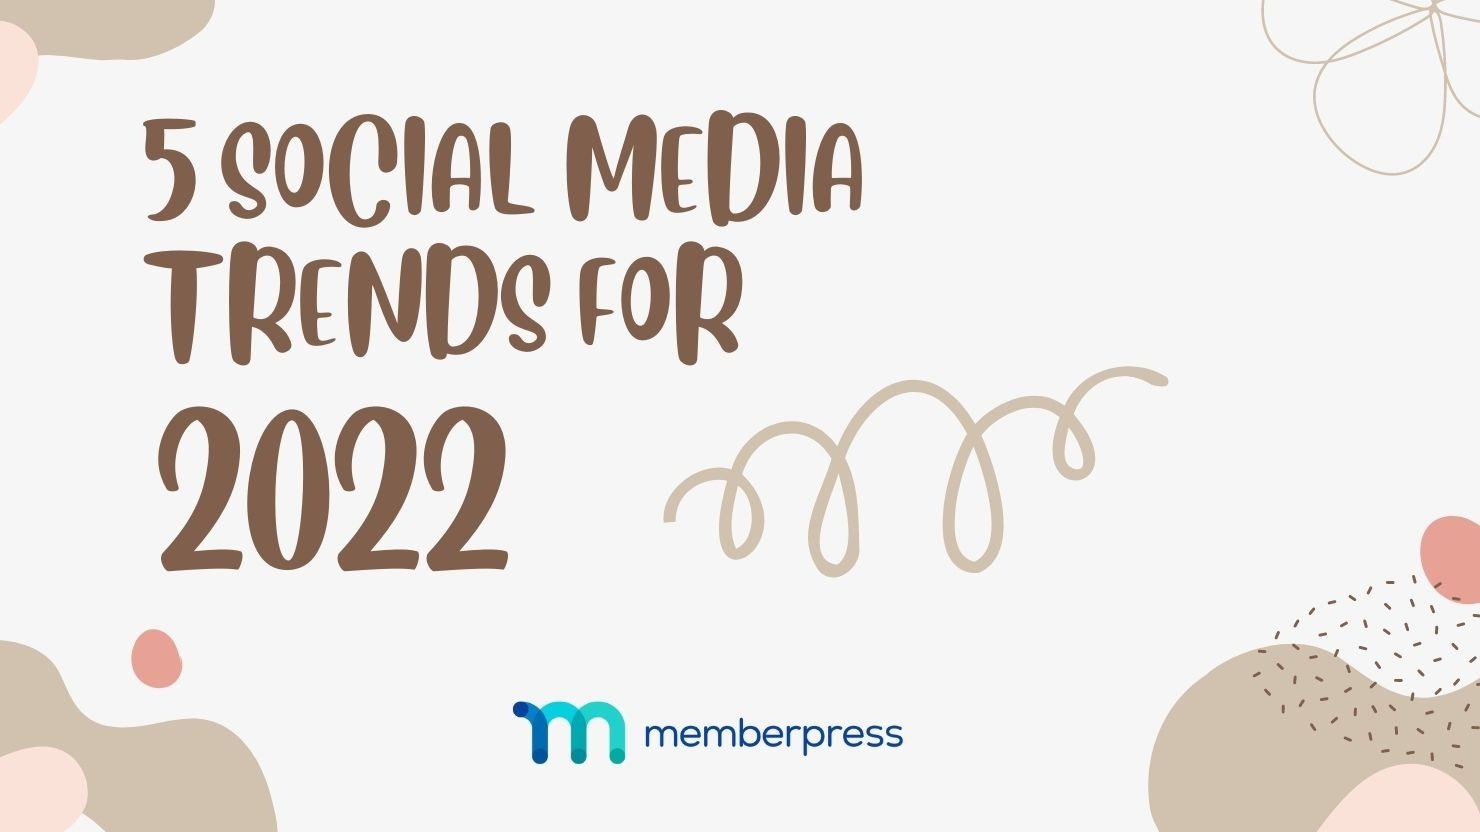 5 Social Media Trends for 2022 that You Need to Know